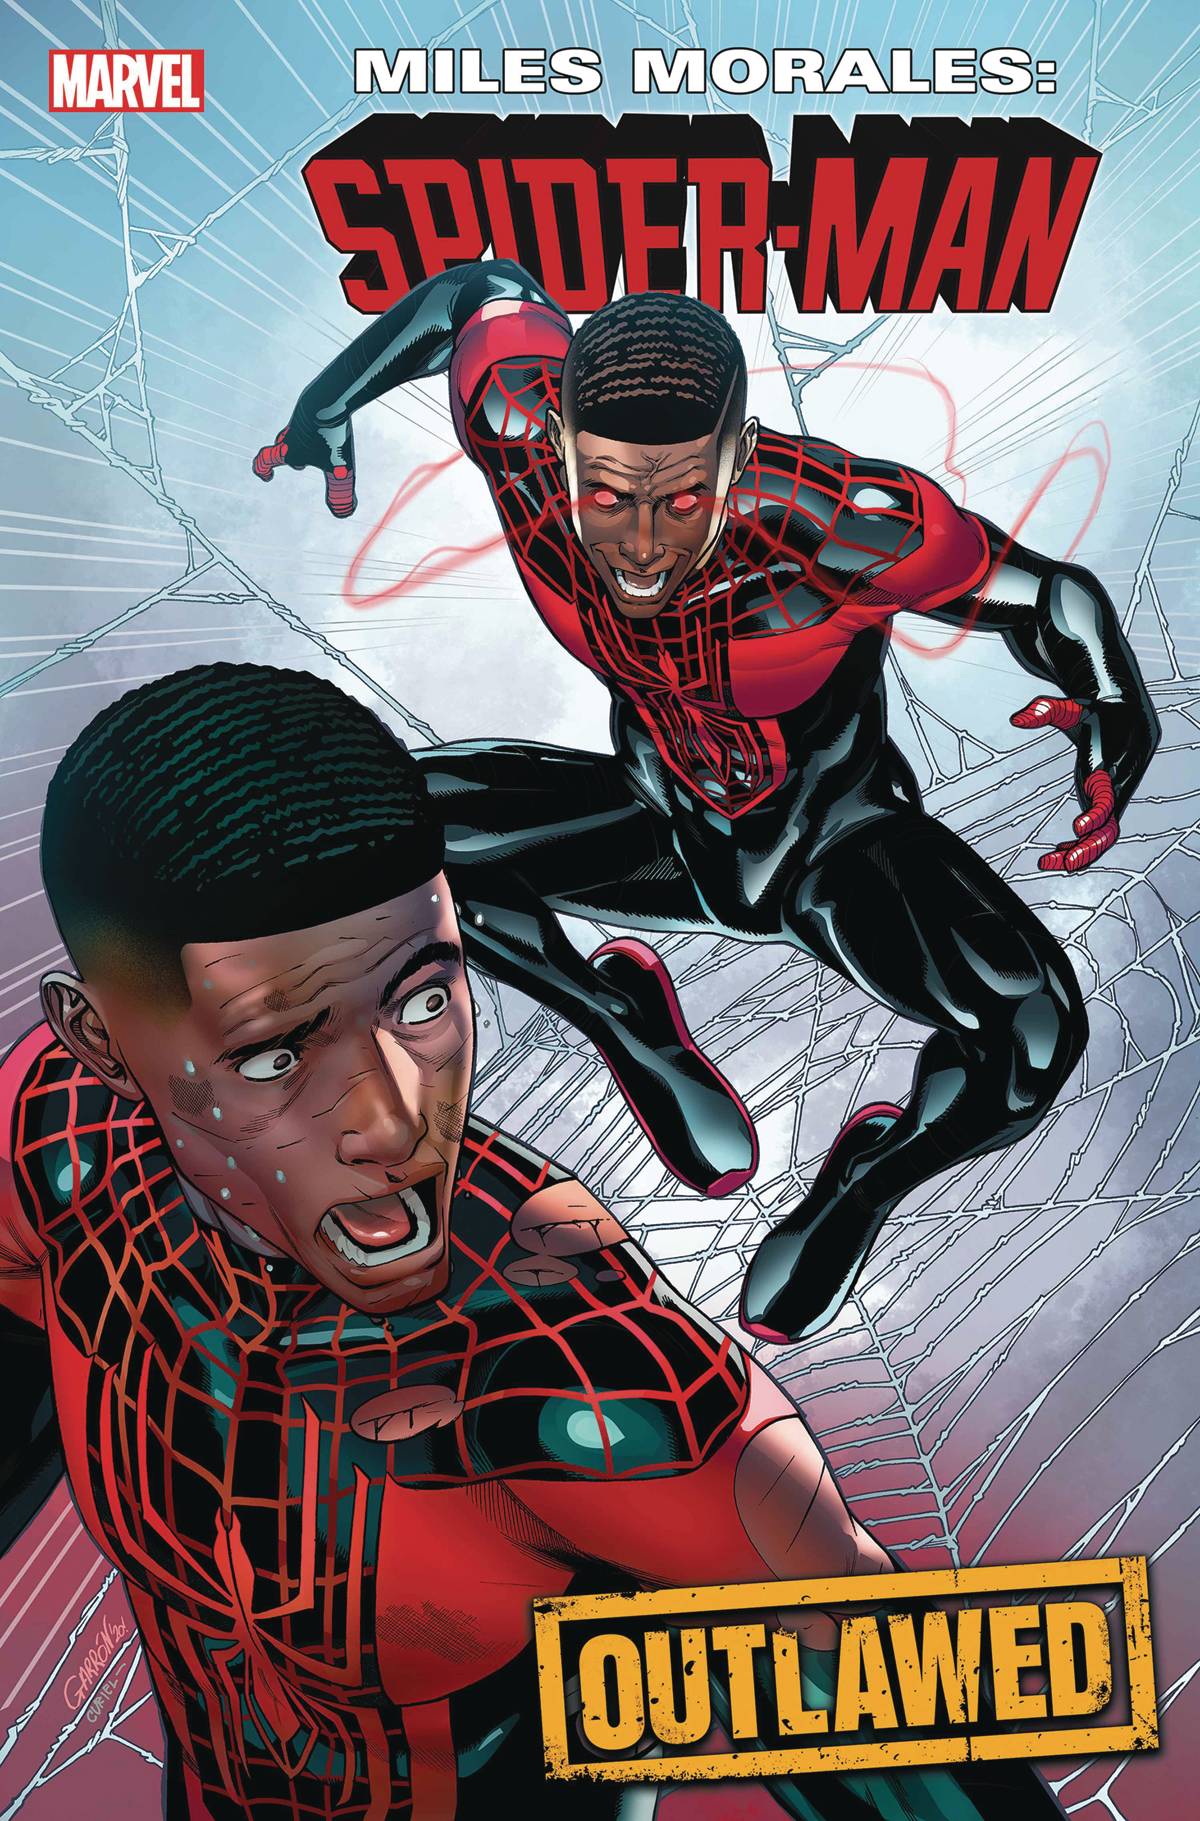 Miles-Morales-Spider-Man-19-Out